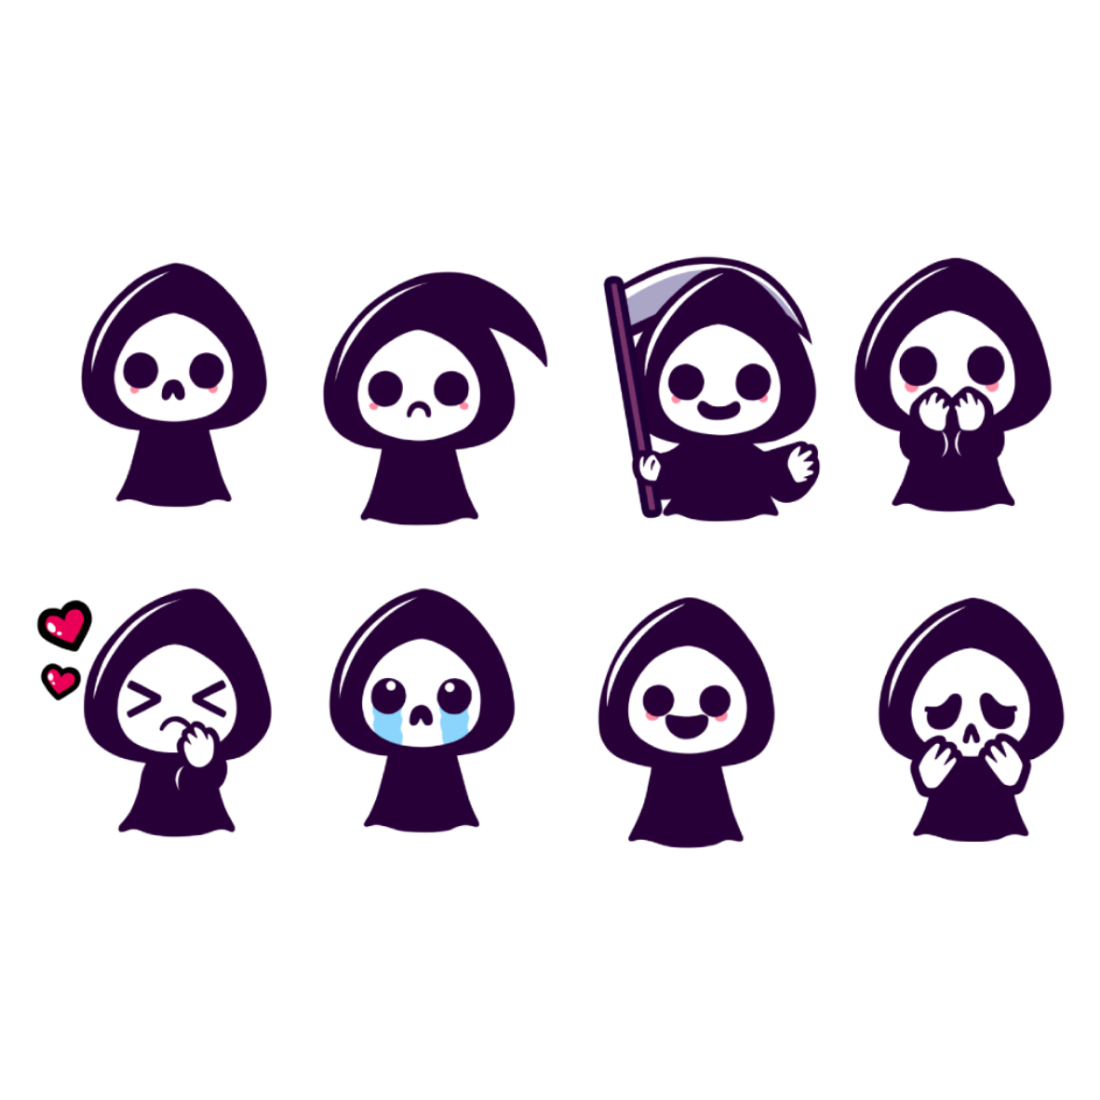 Sticker pack with cute death preview image.